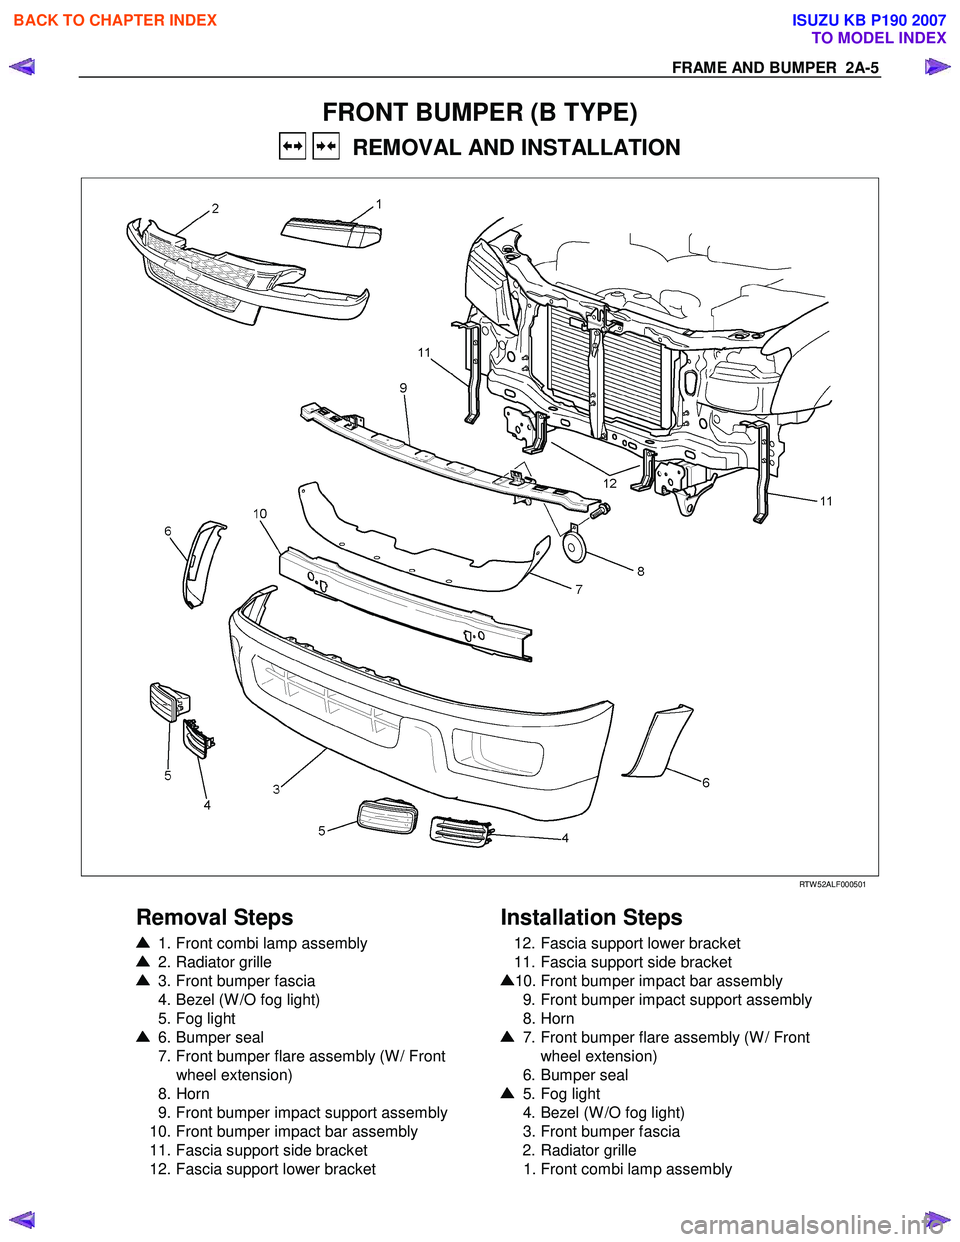 ISUZU KB P190 2007  Workshop User Guide FRAME AND BUMPER  2A-5 
FRONT BUMPER (B TYPE) 
   REMOVAL AND INSTALLATION 
  
 
 RTW 52ALF000501 
 
Removal Steps   
  1. Front combi lamp assembly 
 2. Radiator grille  
 3. Front bumper fascia  
  